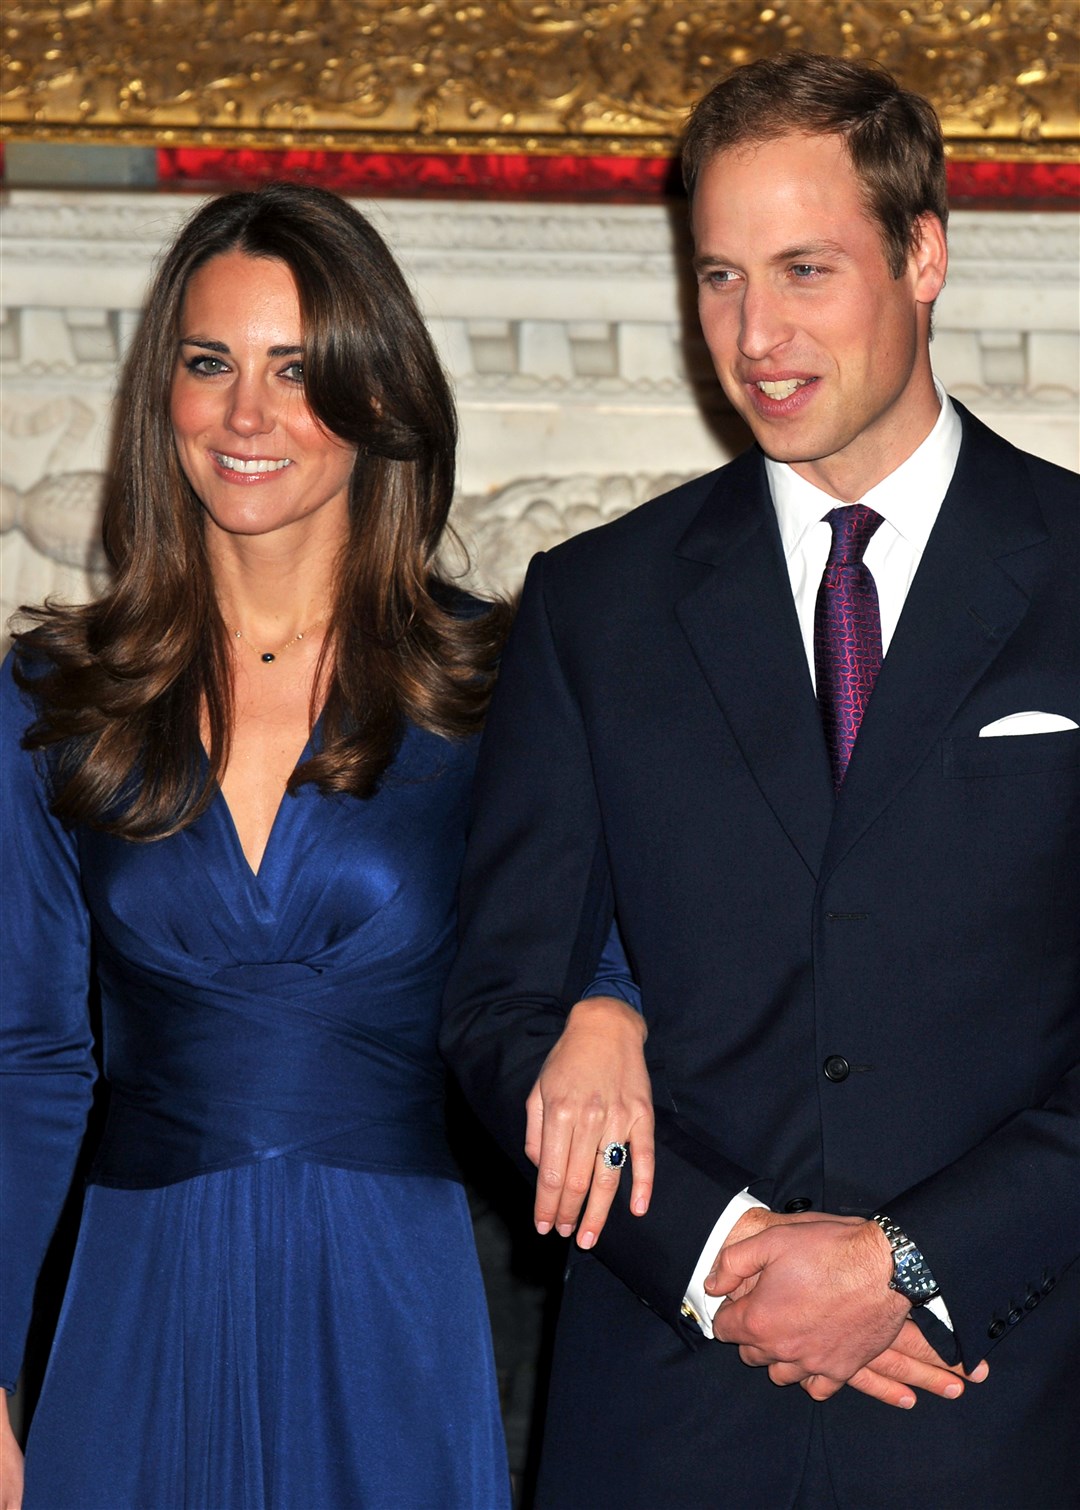 Prince William and Kate Middleton during their engagement photocall in 2010 (John Stillwell/PA)